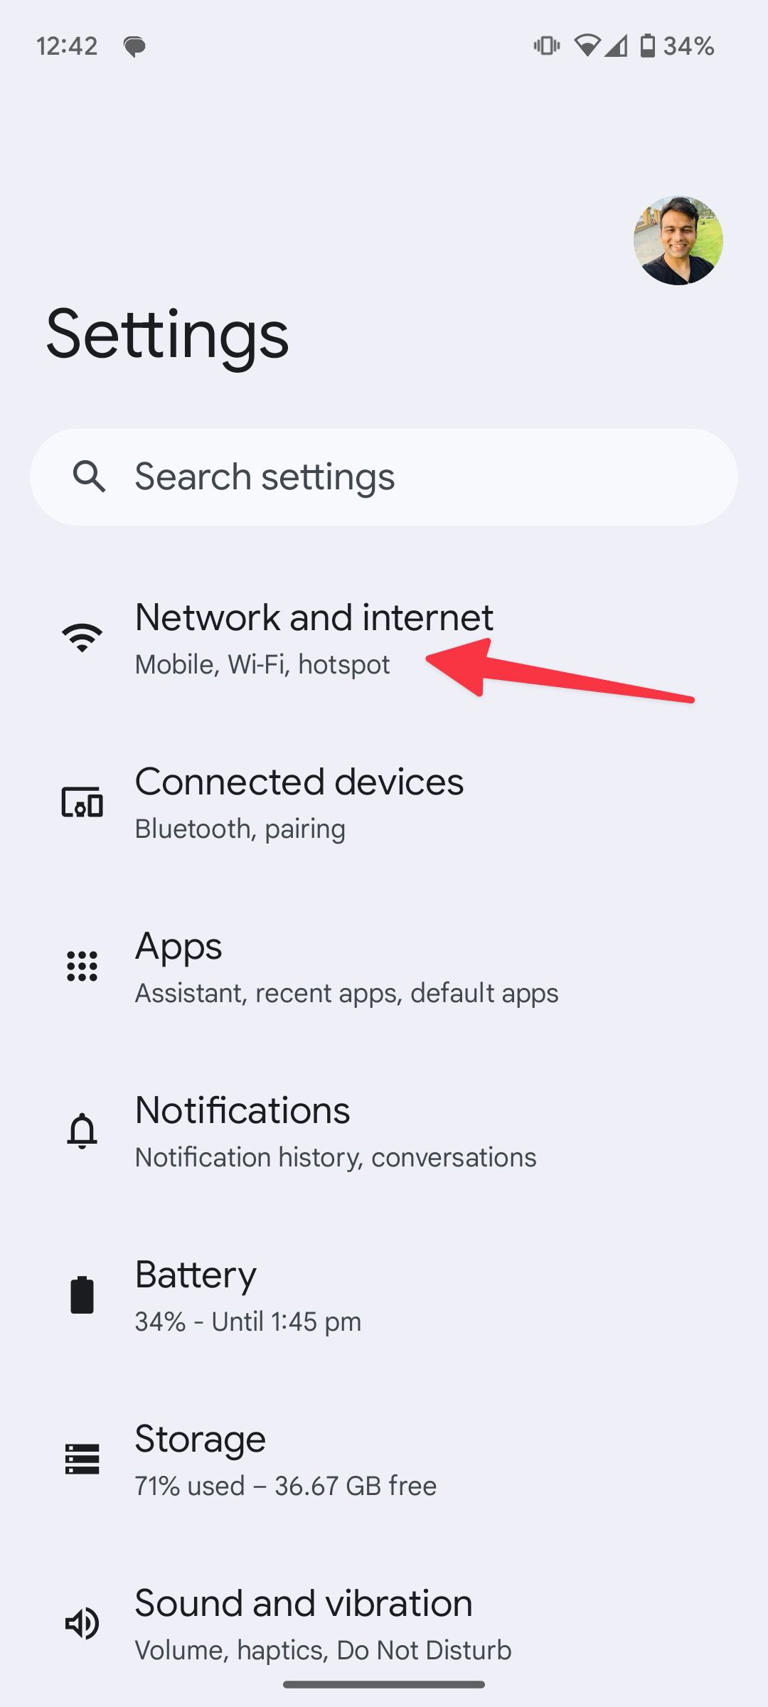 Open network and internet on Android Settings